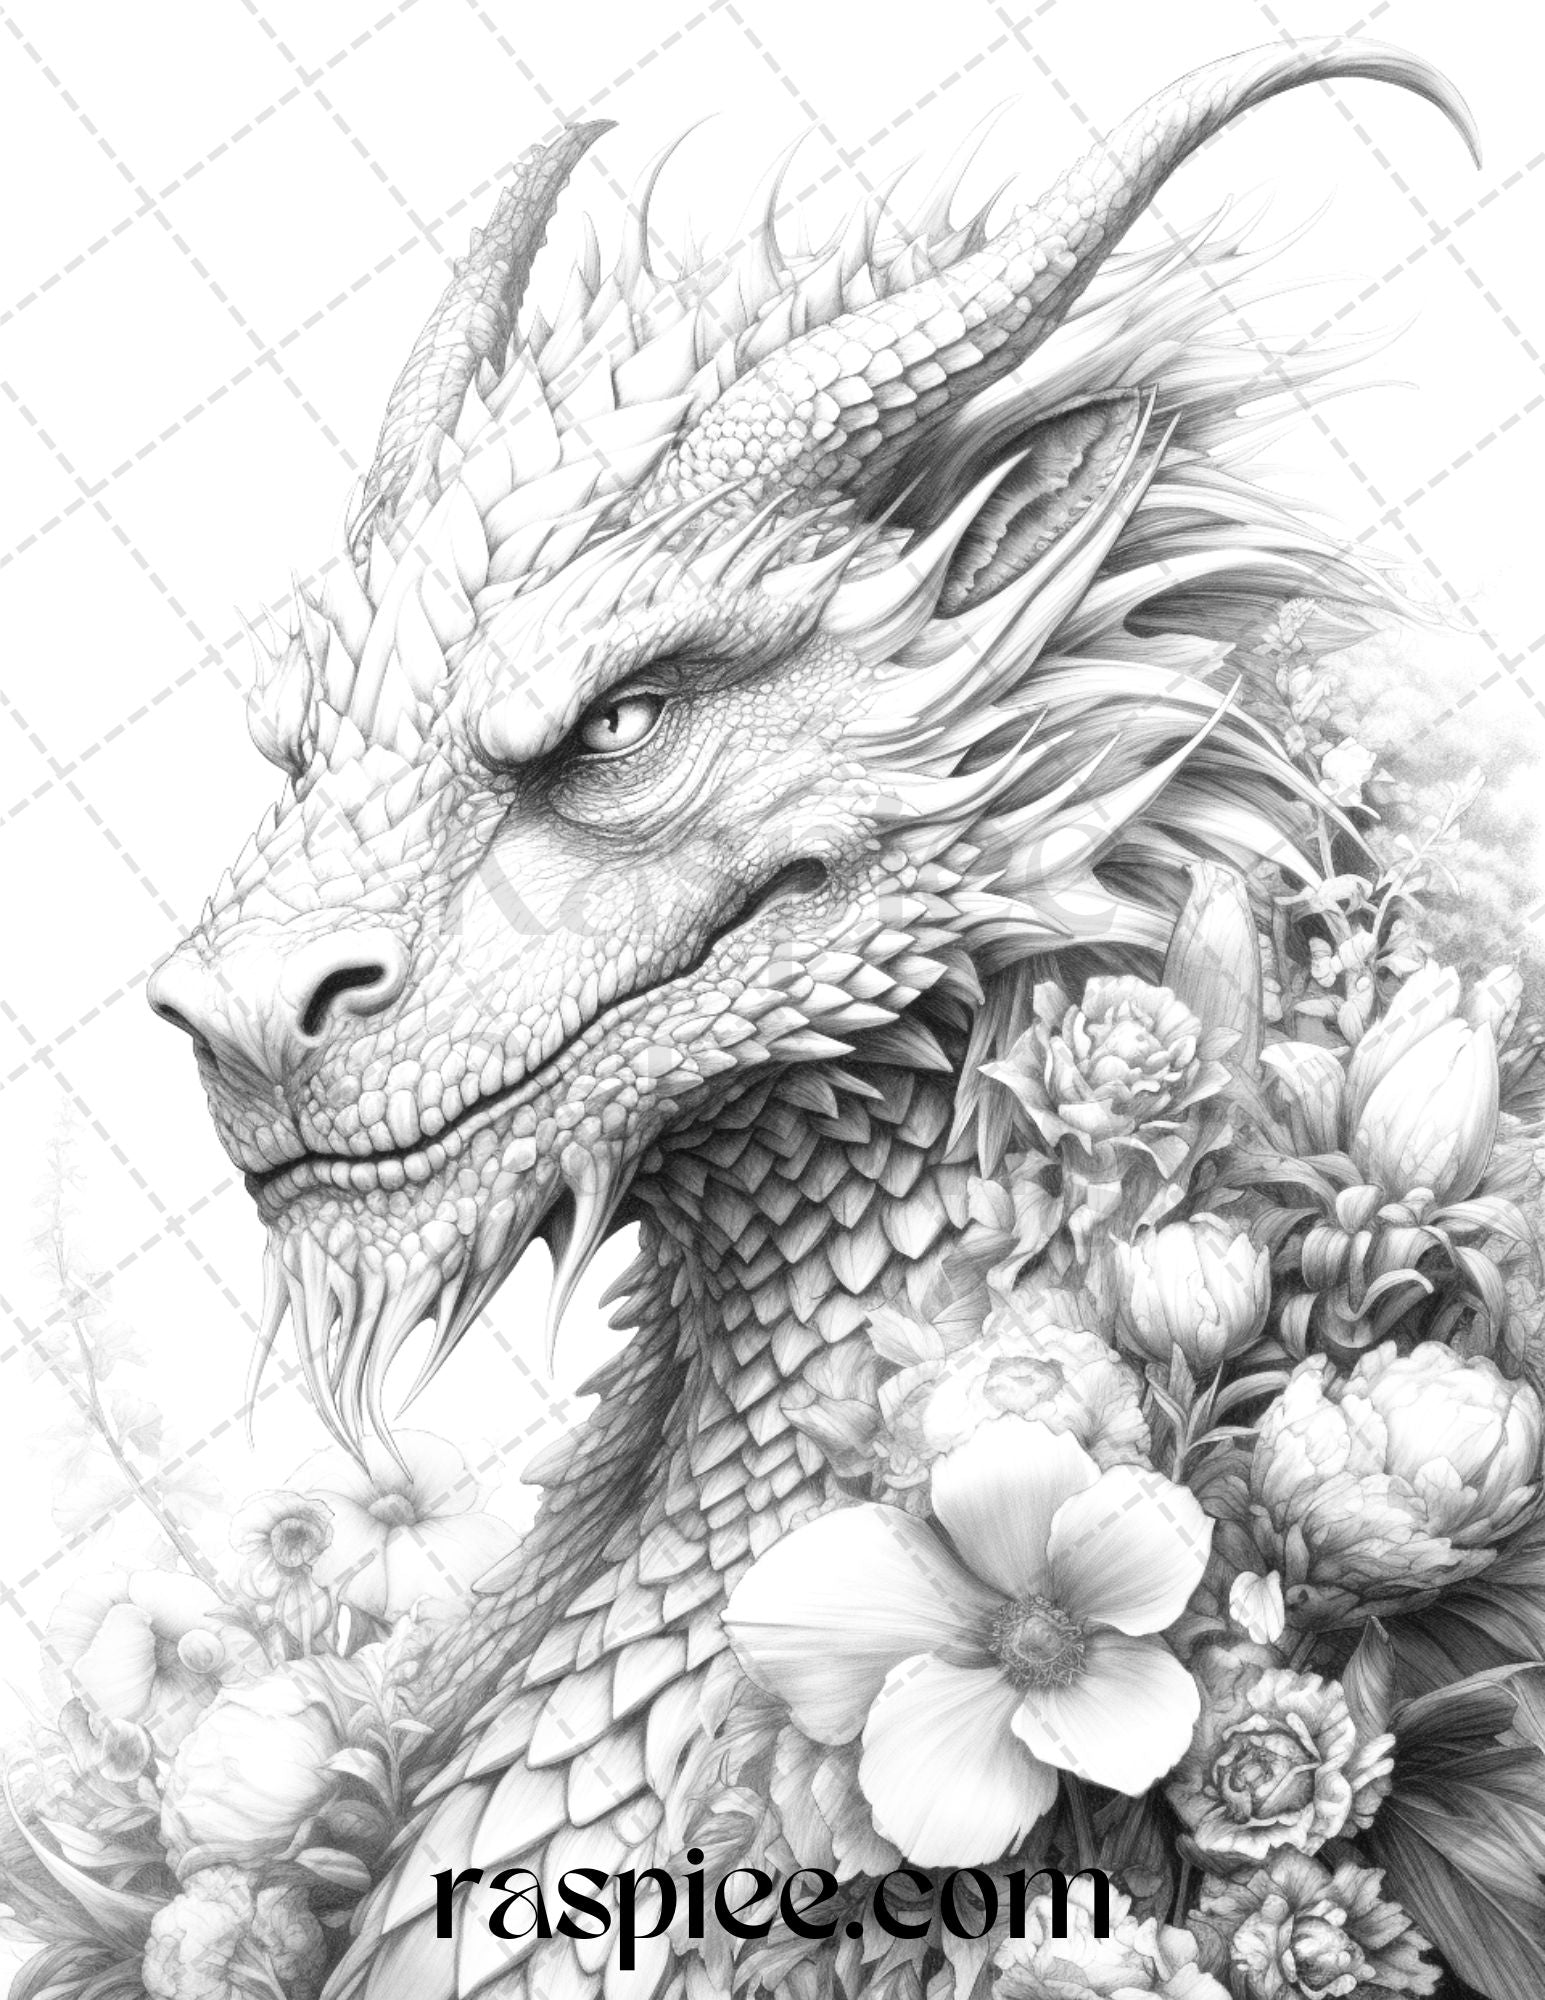 40 Flower Dragon Grayscale Coloring Pages Printable for Adults, PDF File Instant Download - raspiee